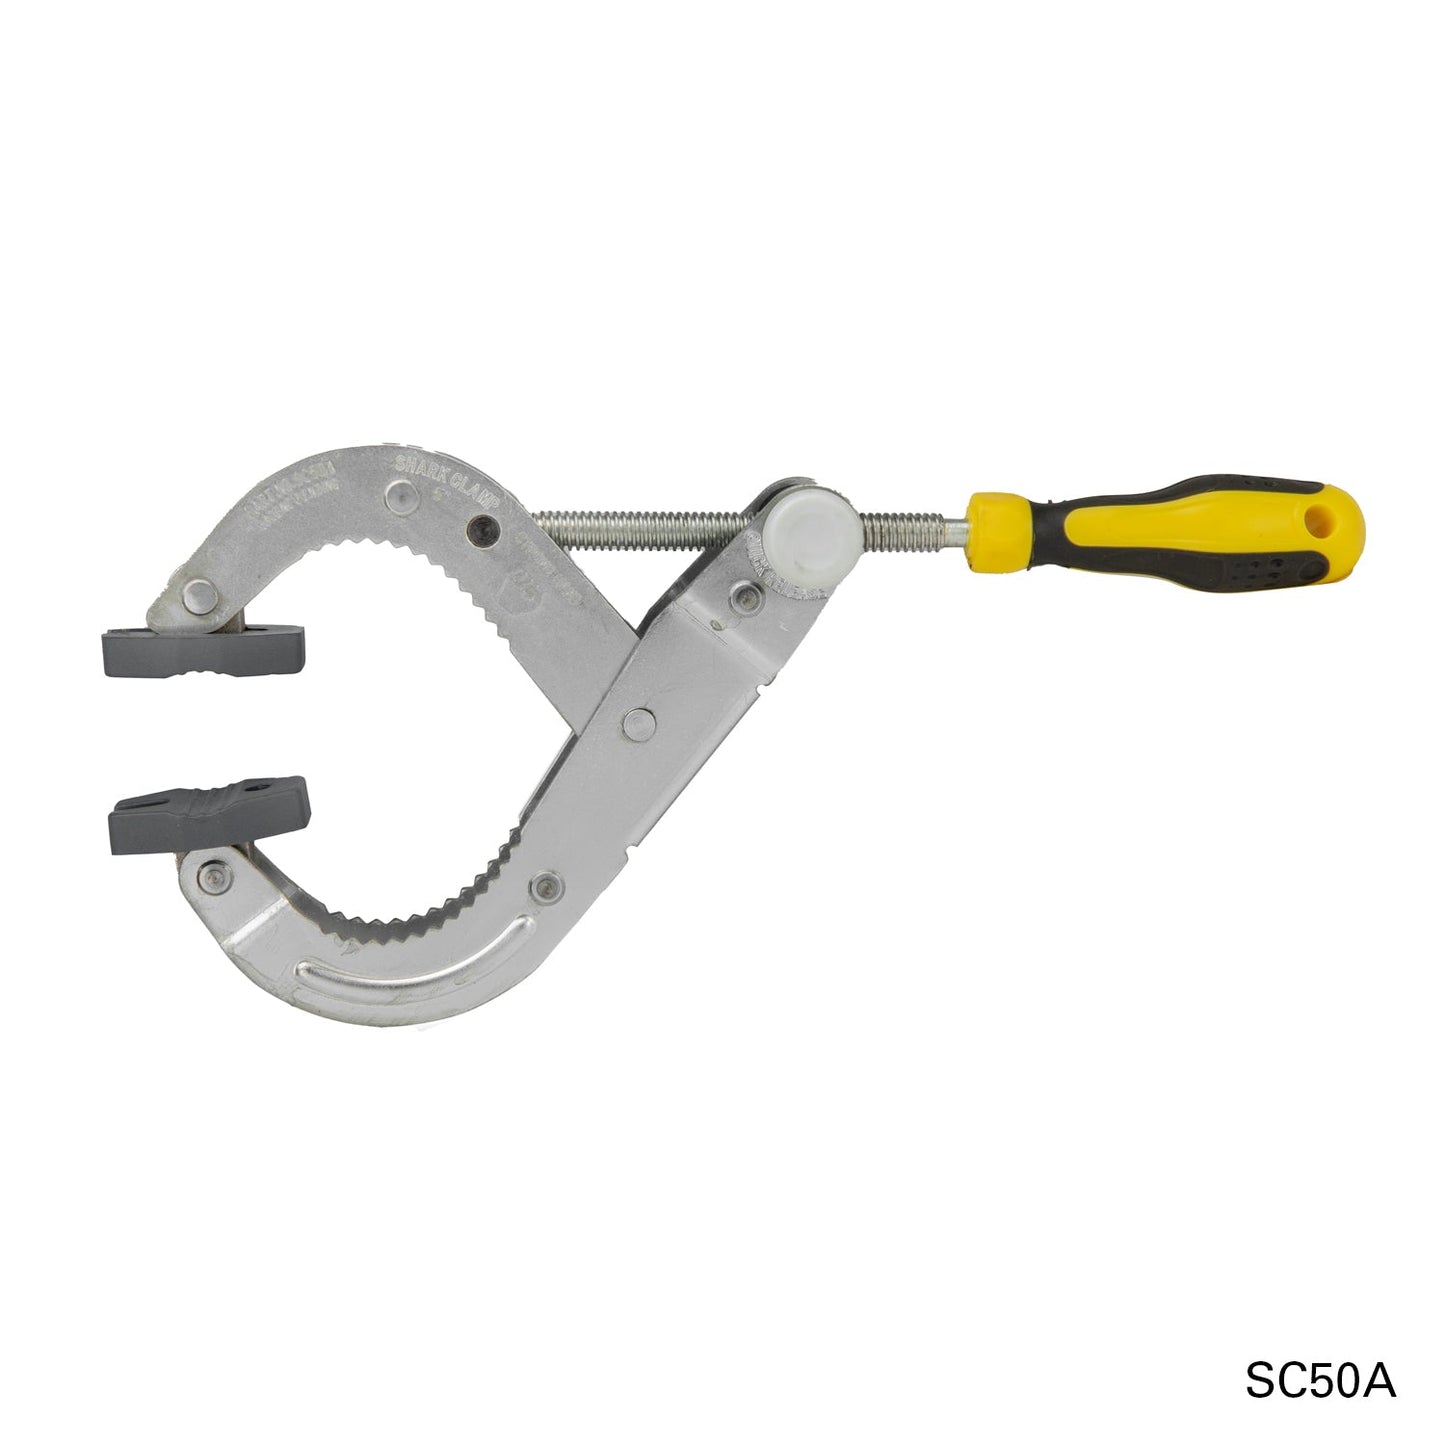 Non-Twisting Shark Clamps